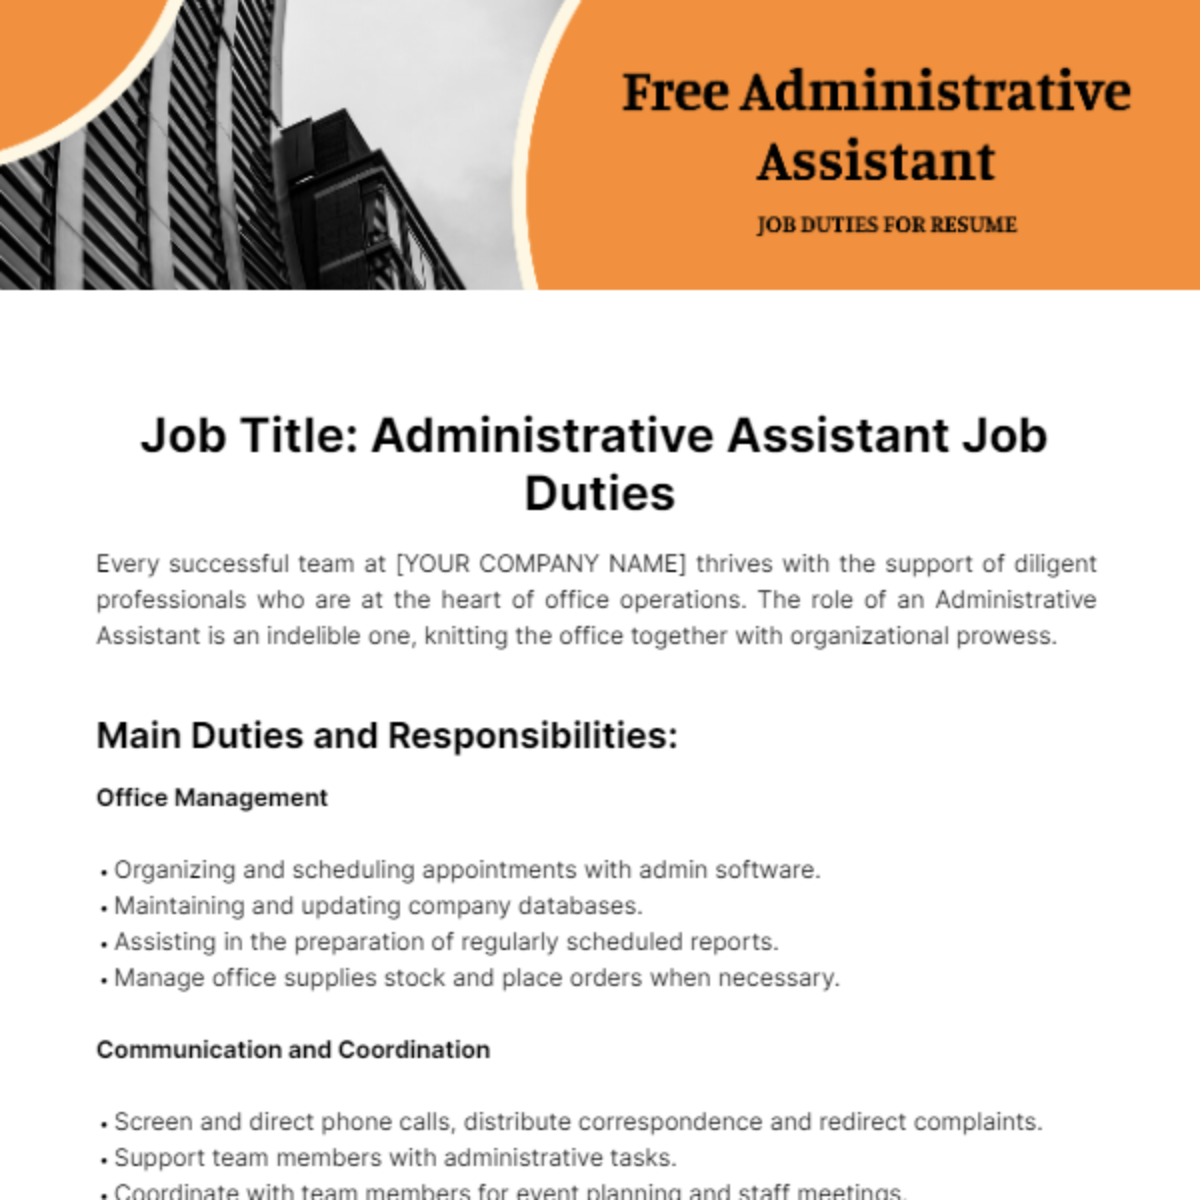 Administrative Assistant Job Duties for Resume Template